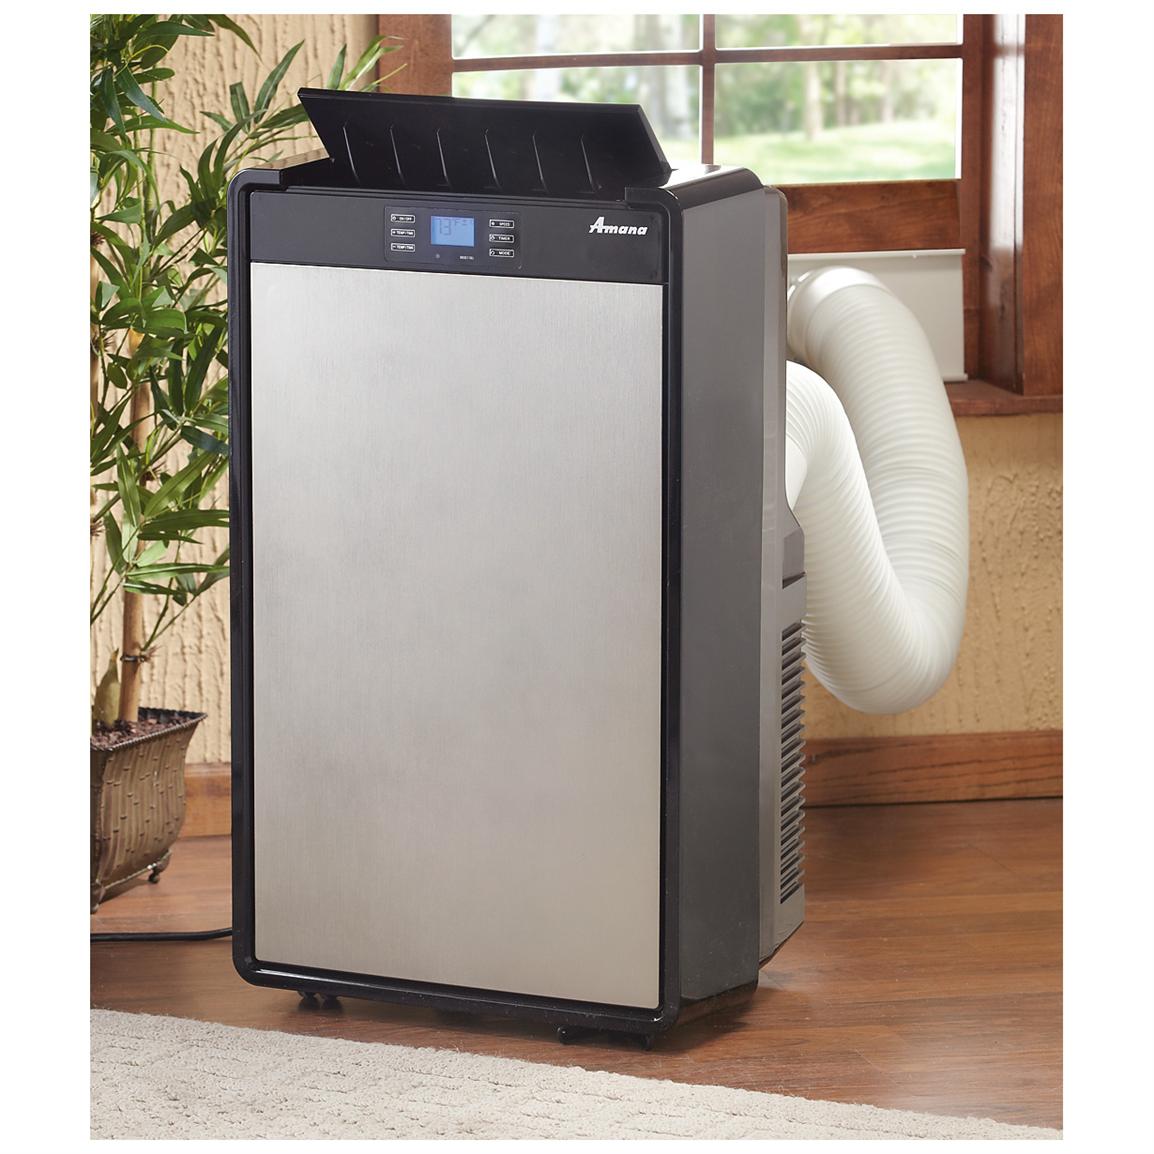 A Portable Air Conditioner Offers An Important Solution For Warm Rooms